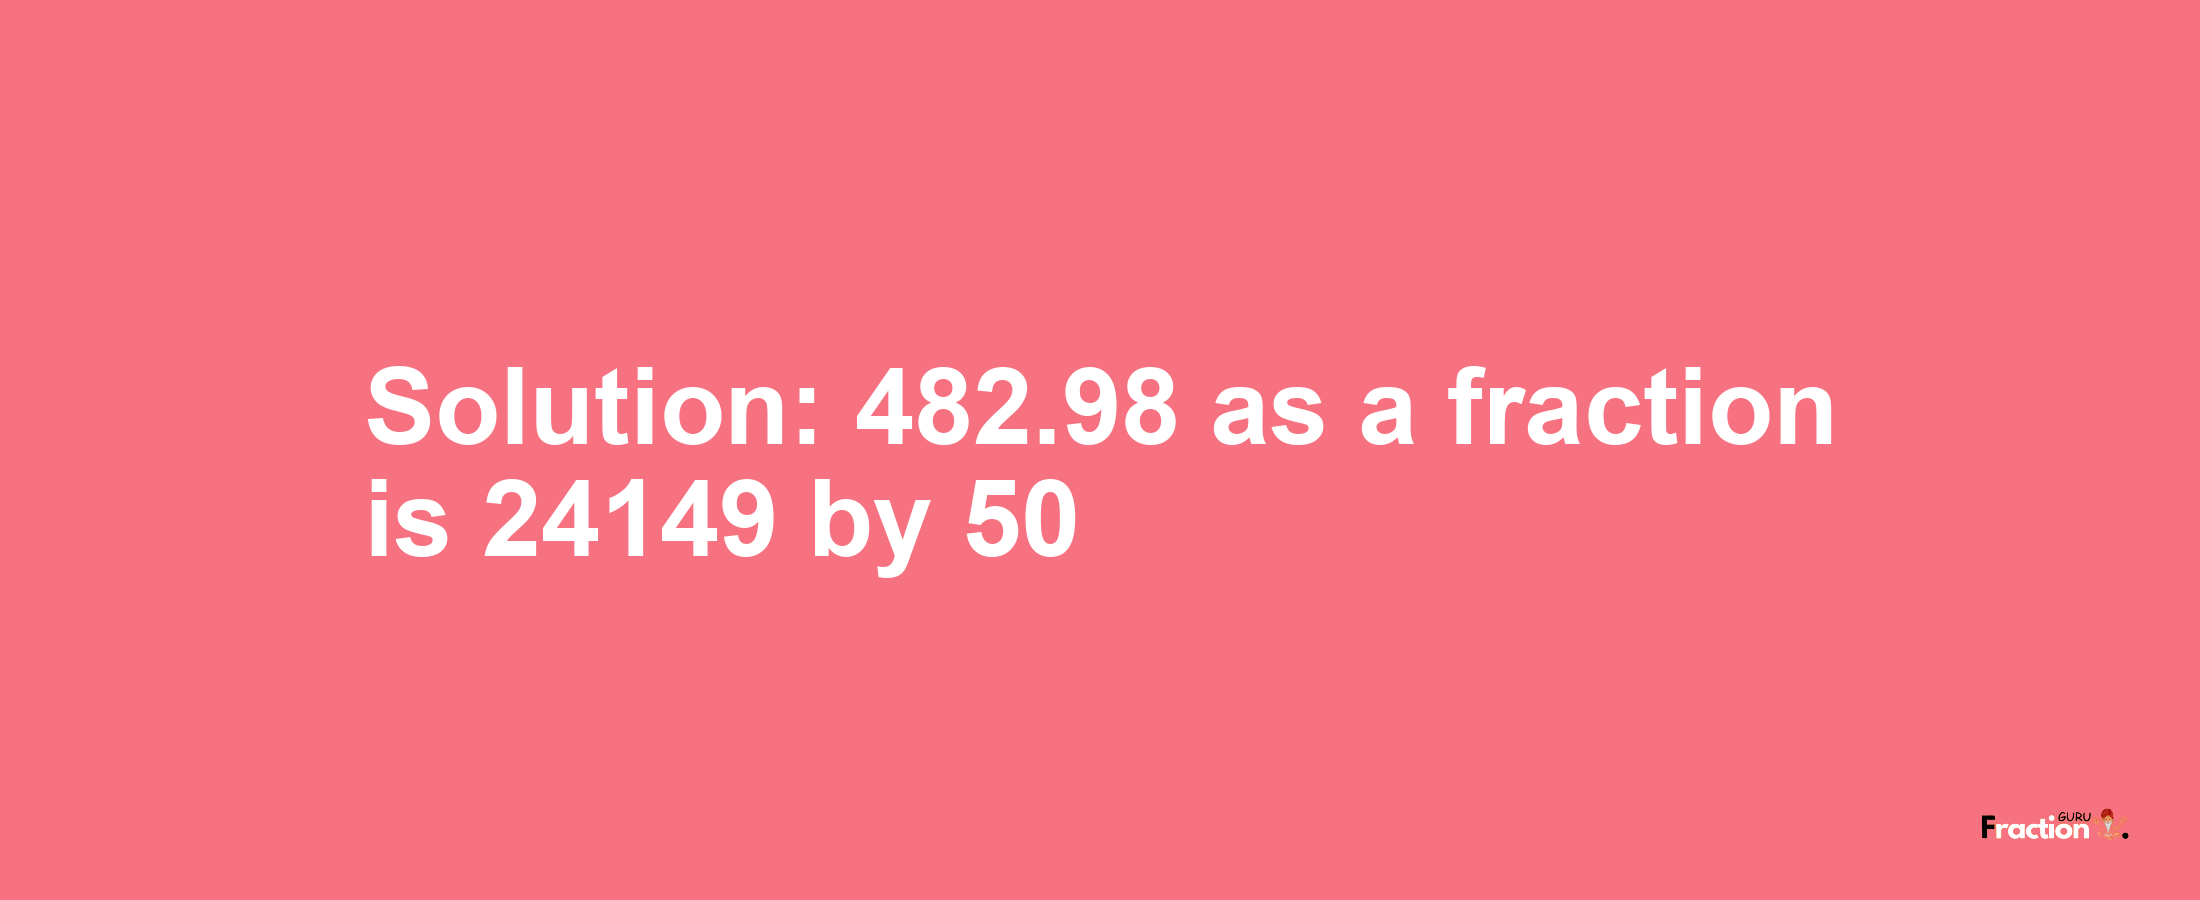 Solution:482.98 as a fraction is 24149/50